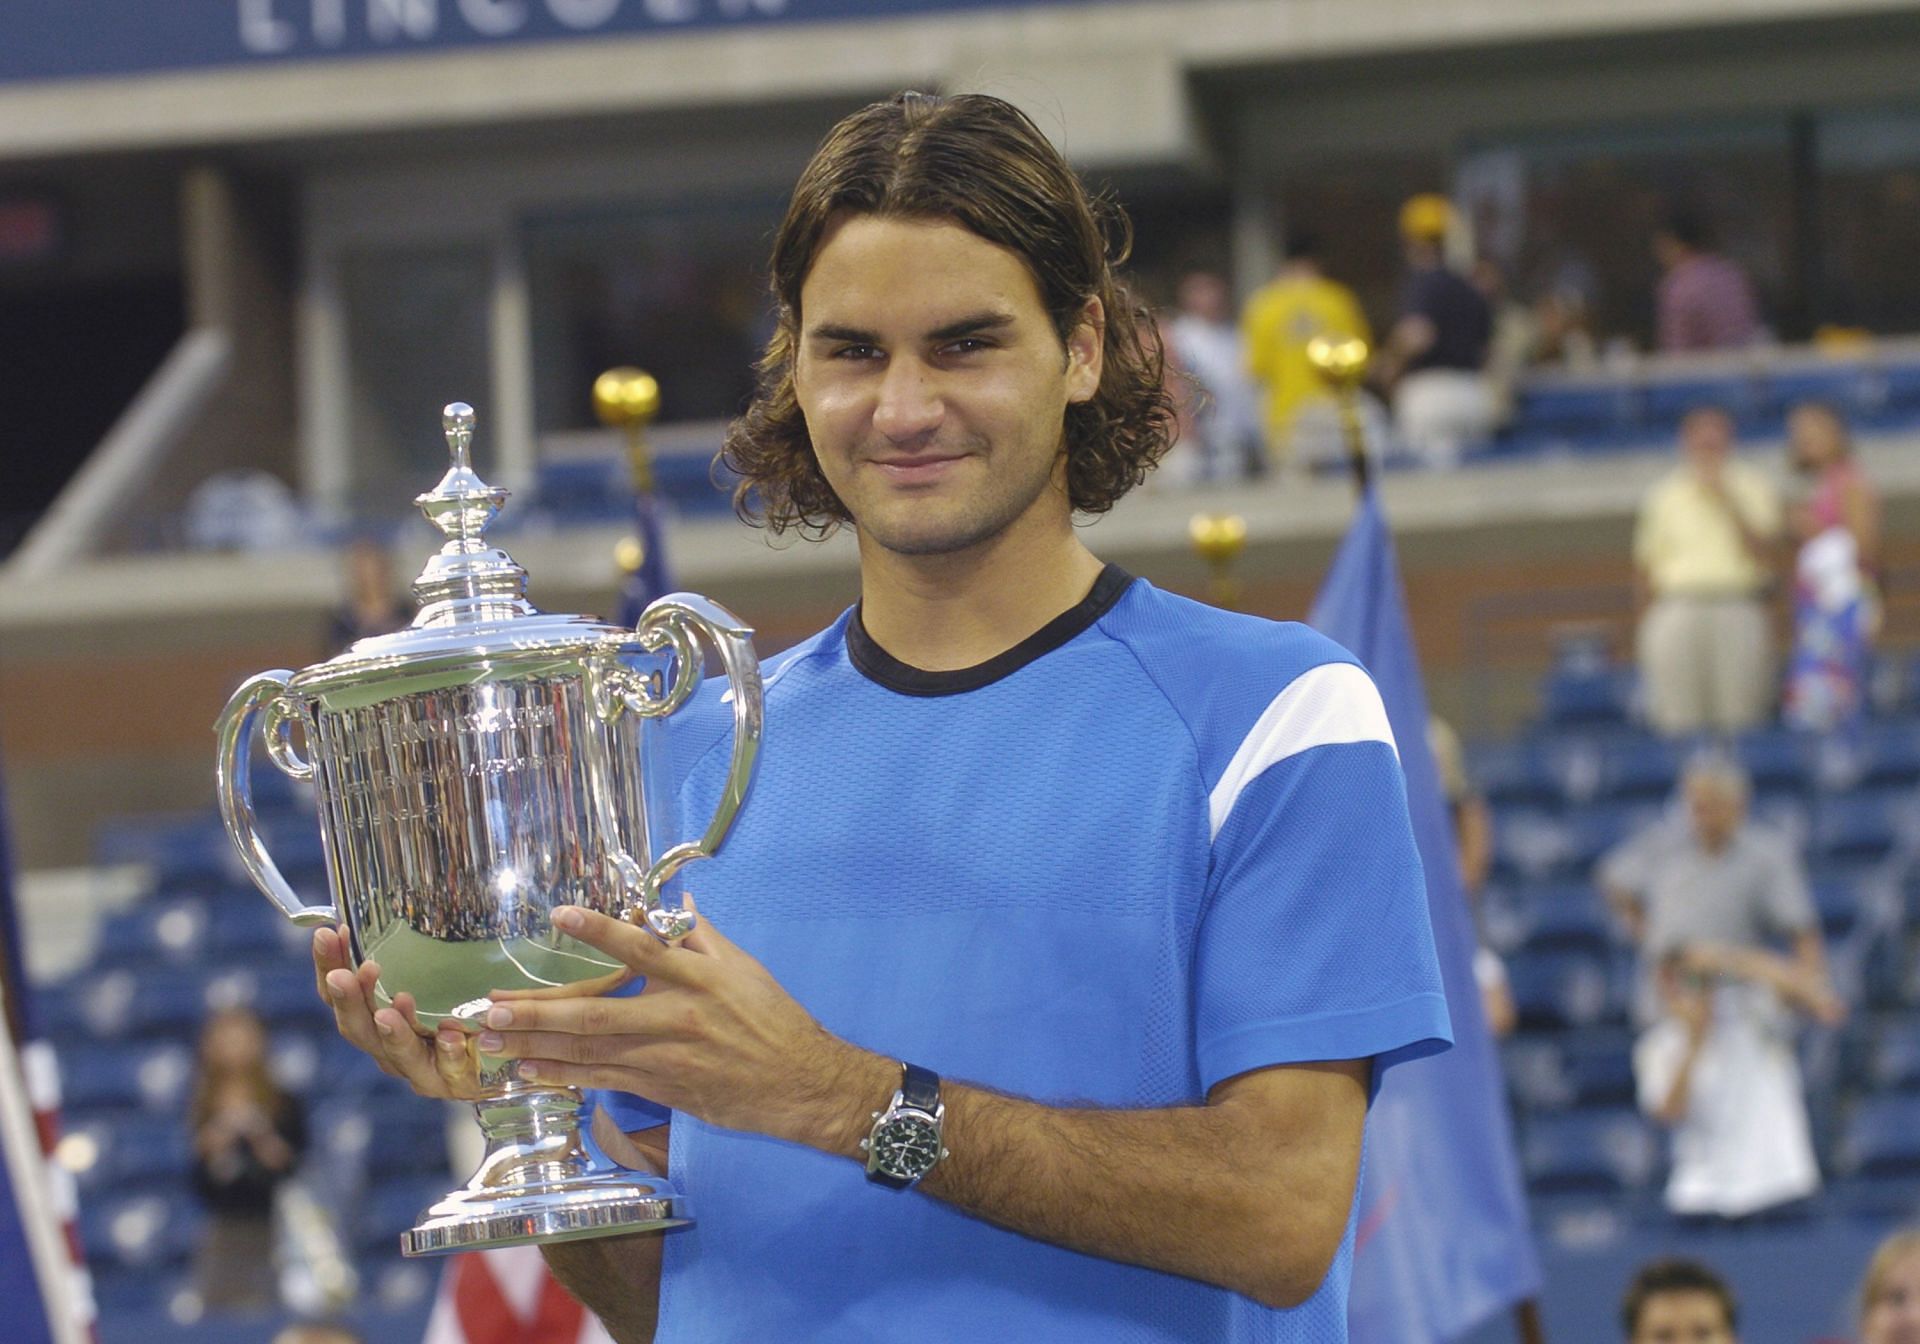 Roger Federer won 74 out of 80 matches in 2004